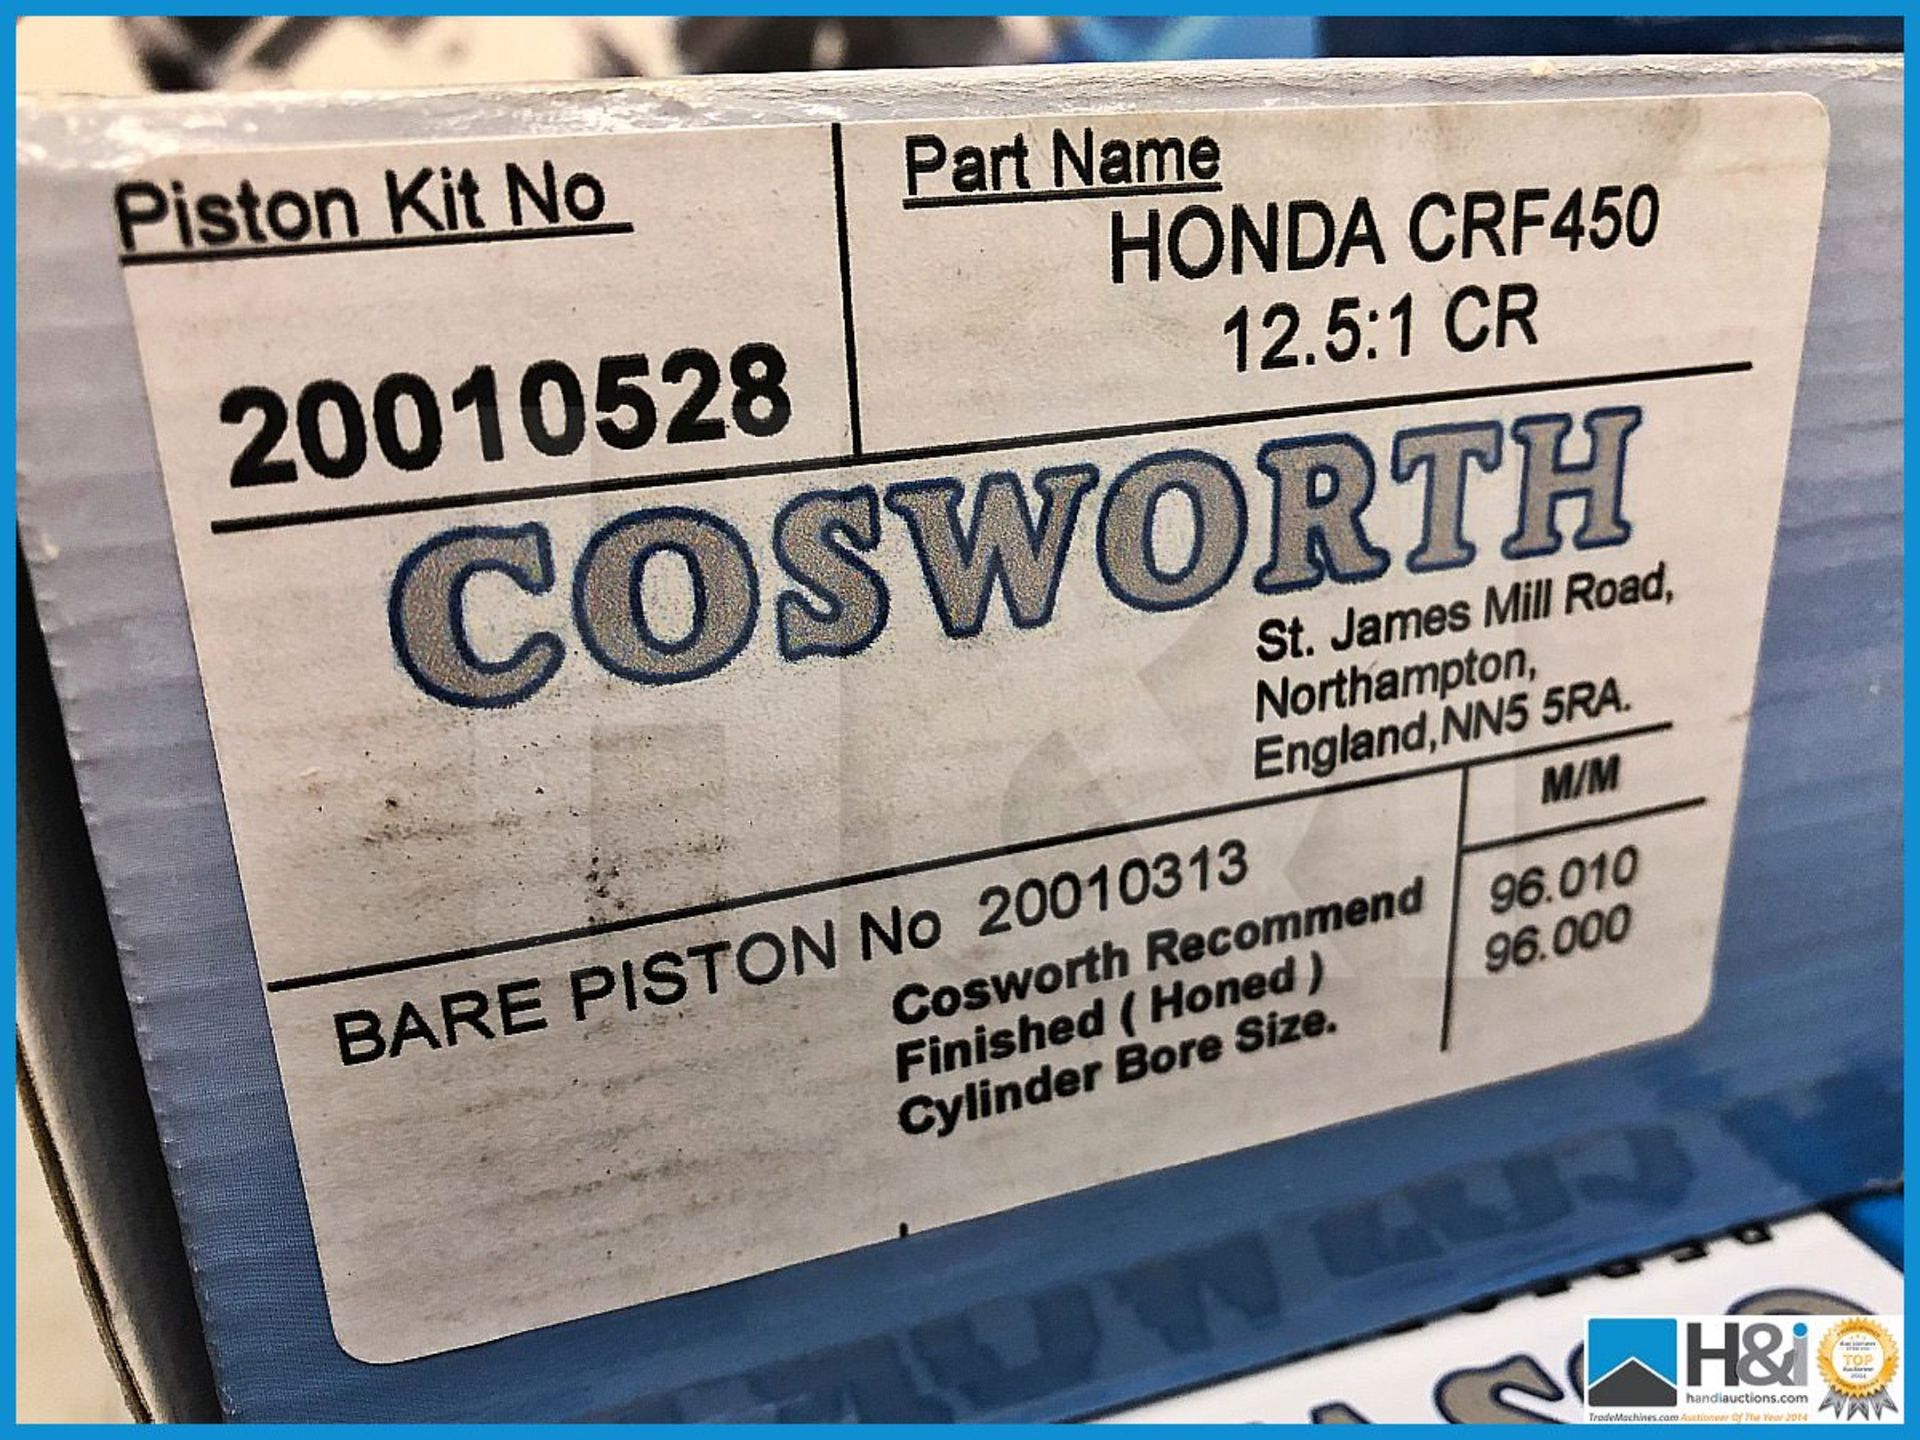 8 x Cosworth piston kits for Honda CRF450 Various specifications. Code: 20010653 - Image 4 of 4